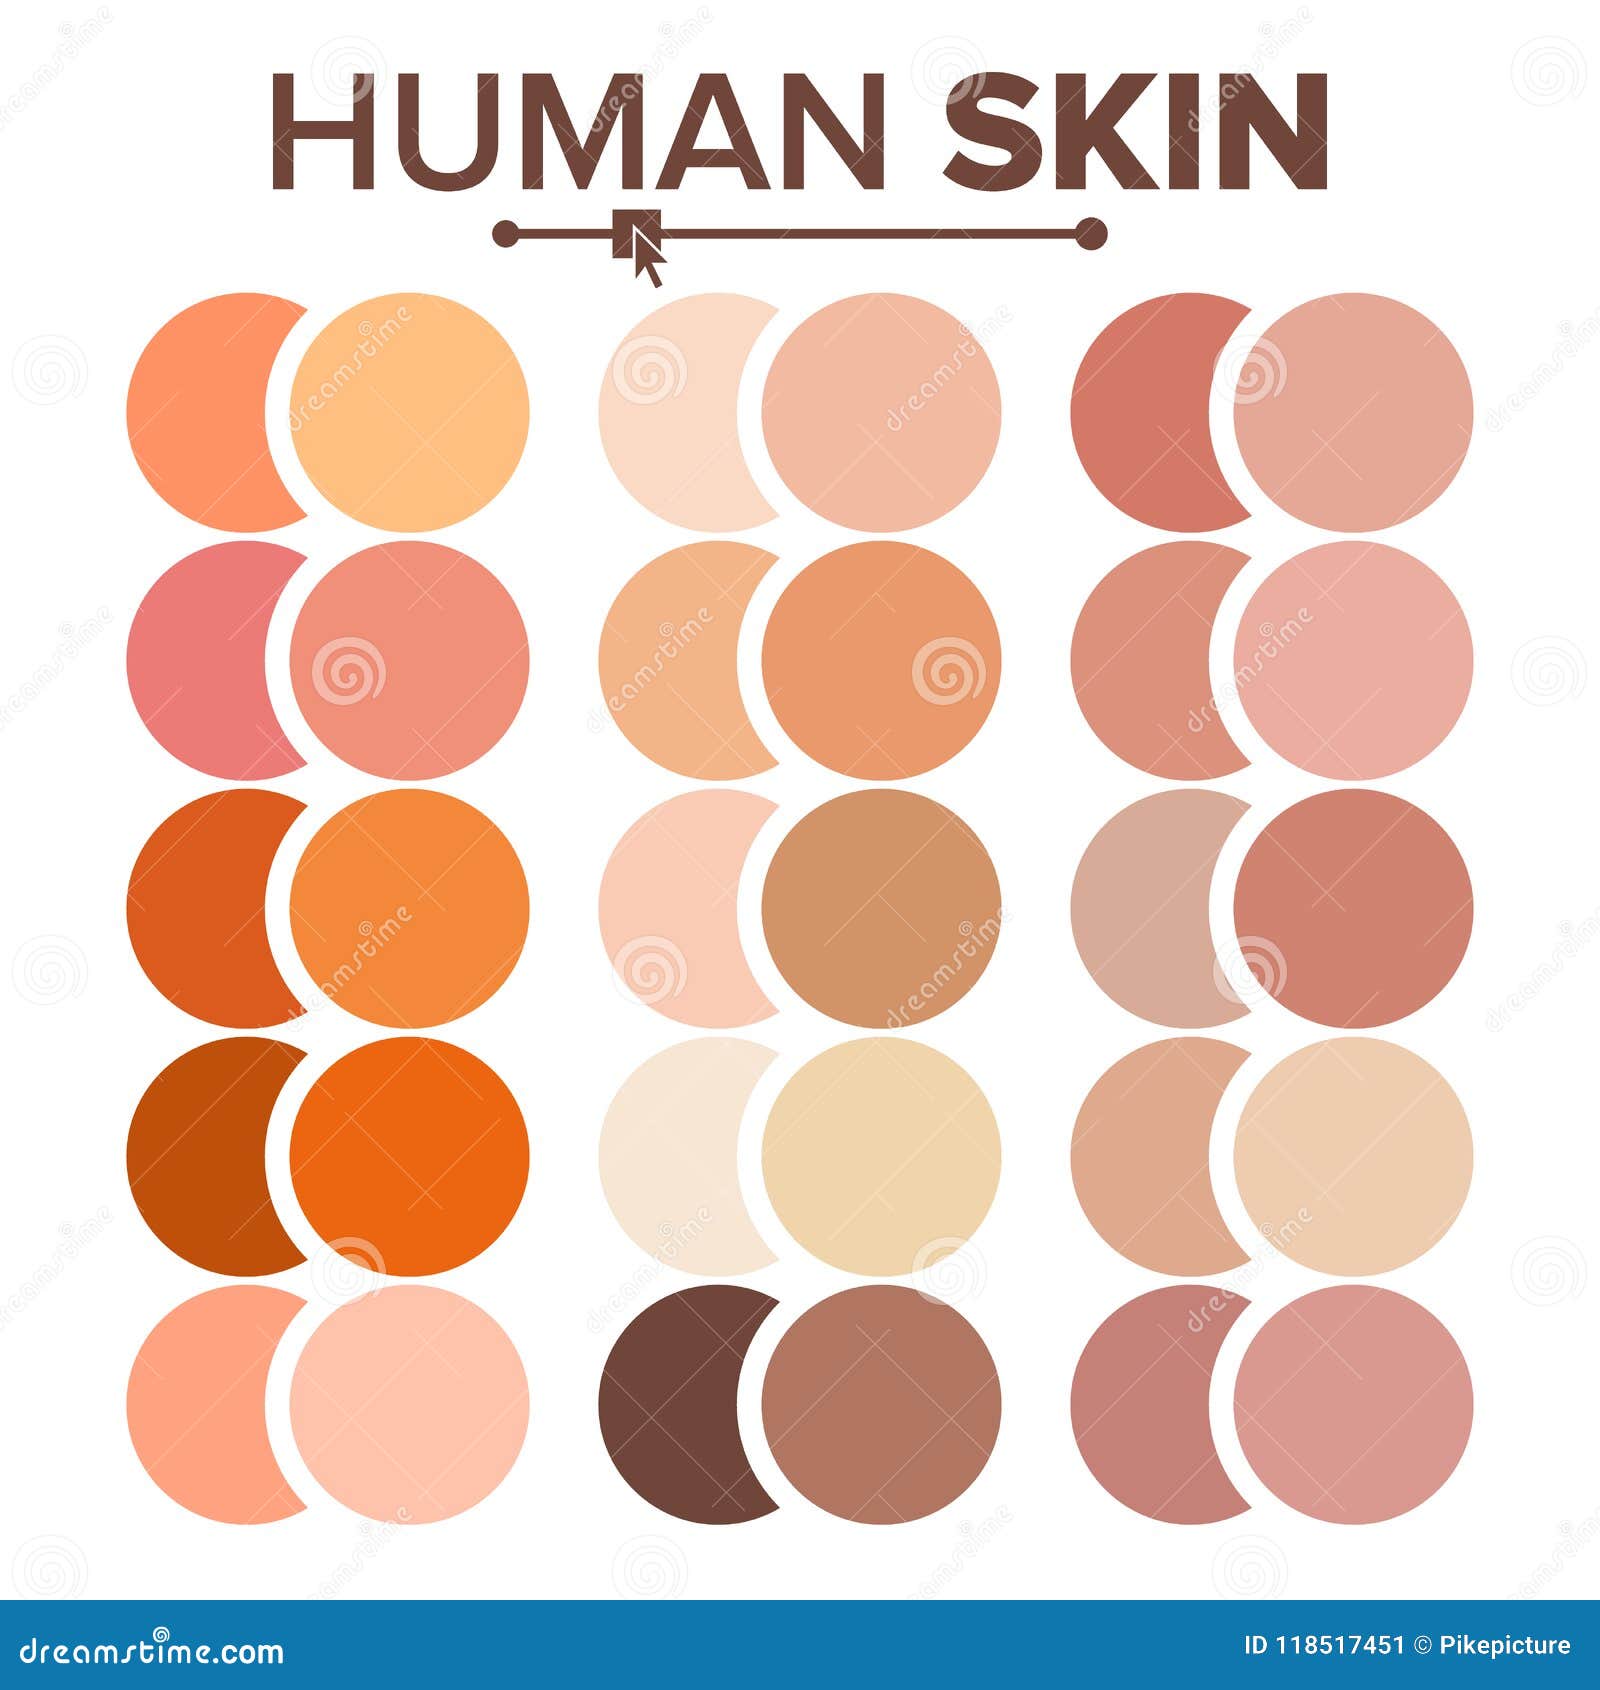 Skin Human Vector. Various Body Tones Chart. Realistic Texture Palette ...